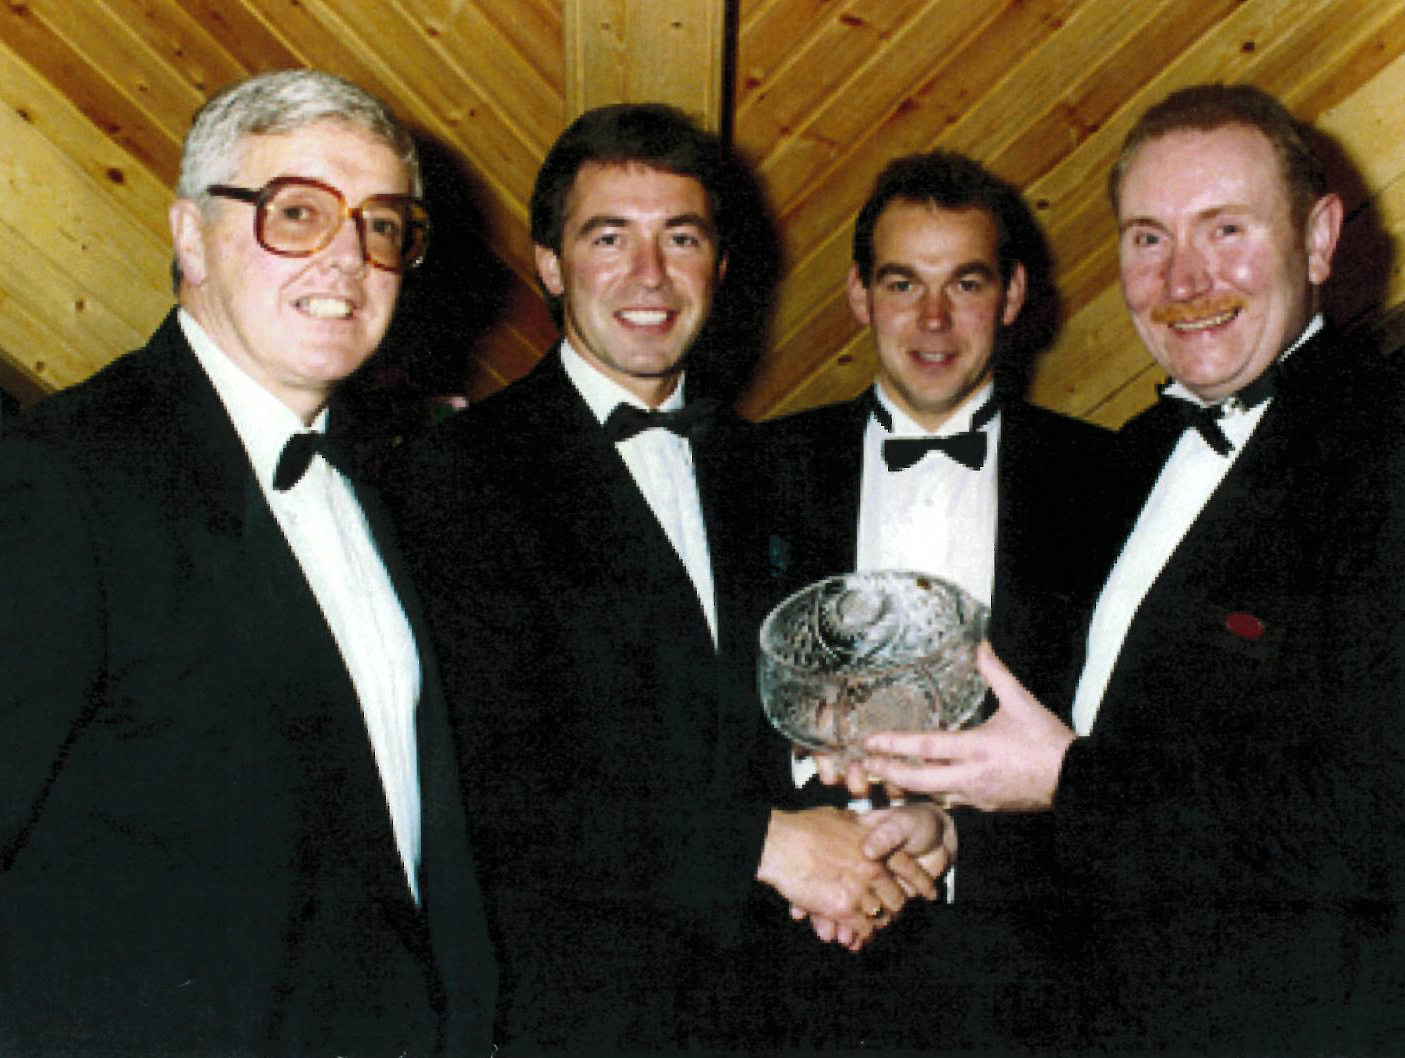 Clerkin (second from left), with John Lavery (far left),  honoring Stephen  McComb (far right) on the occasion of the opening of his new hotel in Belfast, c. 1990. 